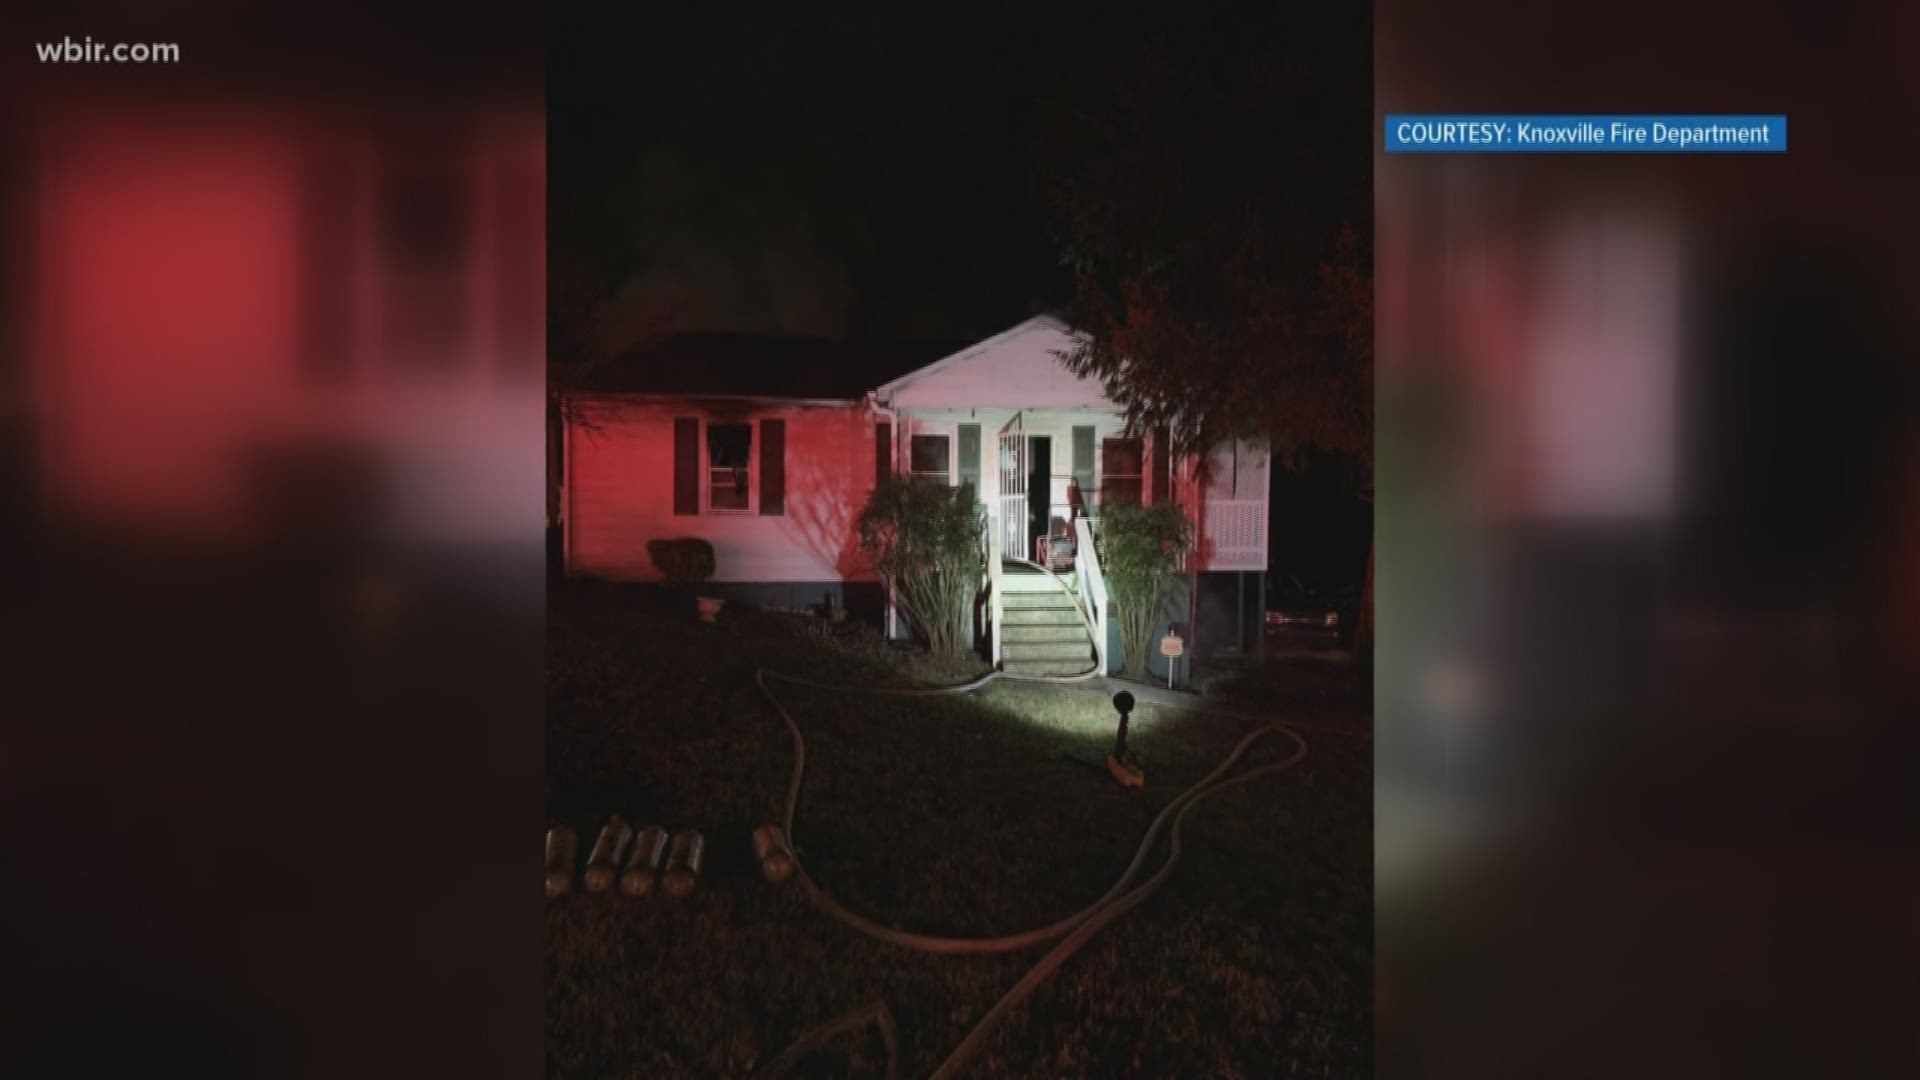 The Knoxville Fire Department responded to a call about a house fire on Skyline Drive at 1:34 a.m. Tuesday morning.